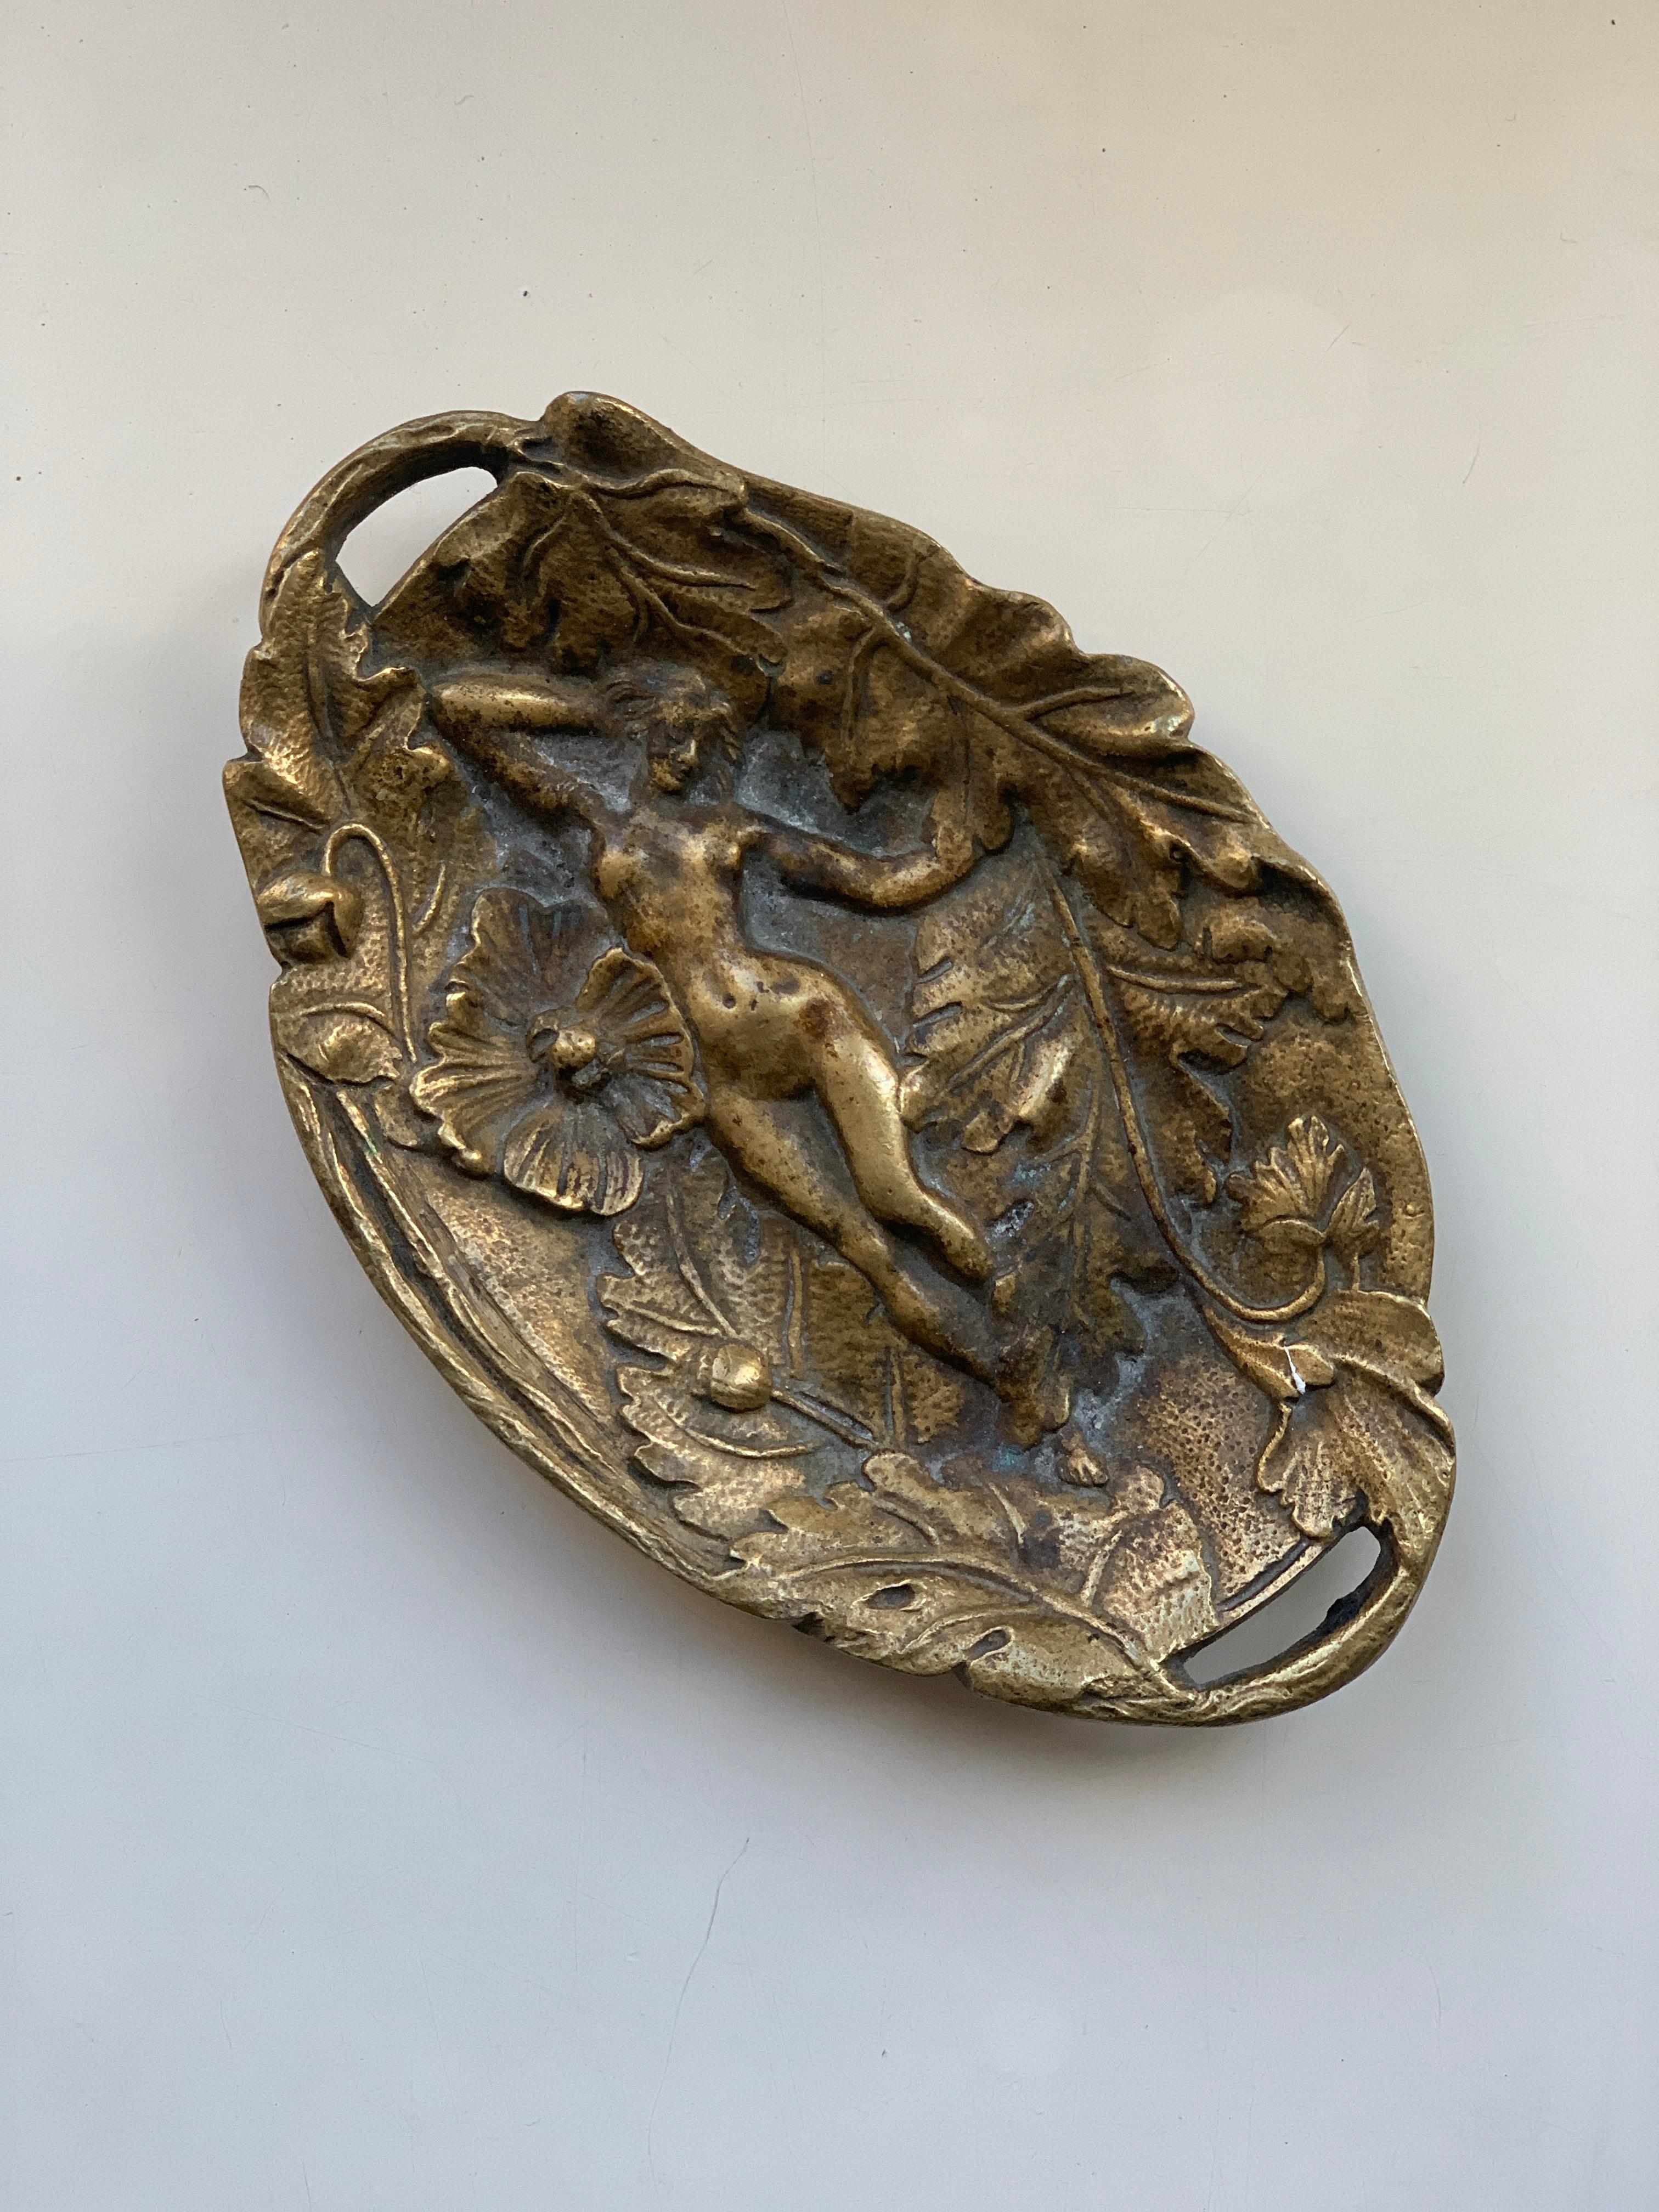 This bronze piece was used as pin tray also known as vide poche where you place rings or any other small item on your dresser or any other area in the home.
This original gilt bronze piece has nice finish and finely detailed woman's body surrounded